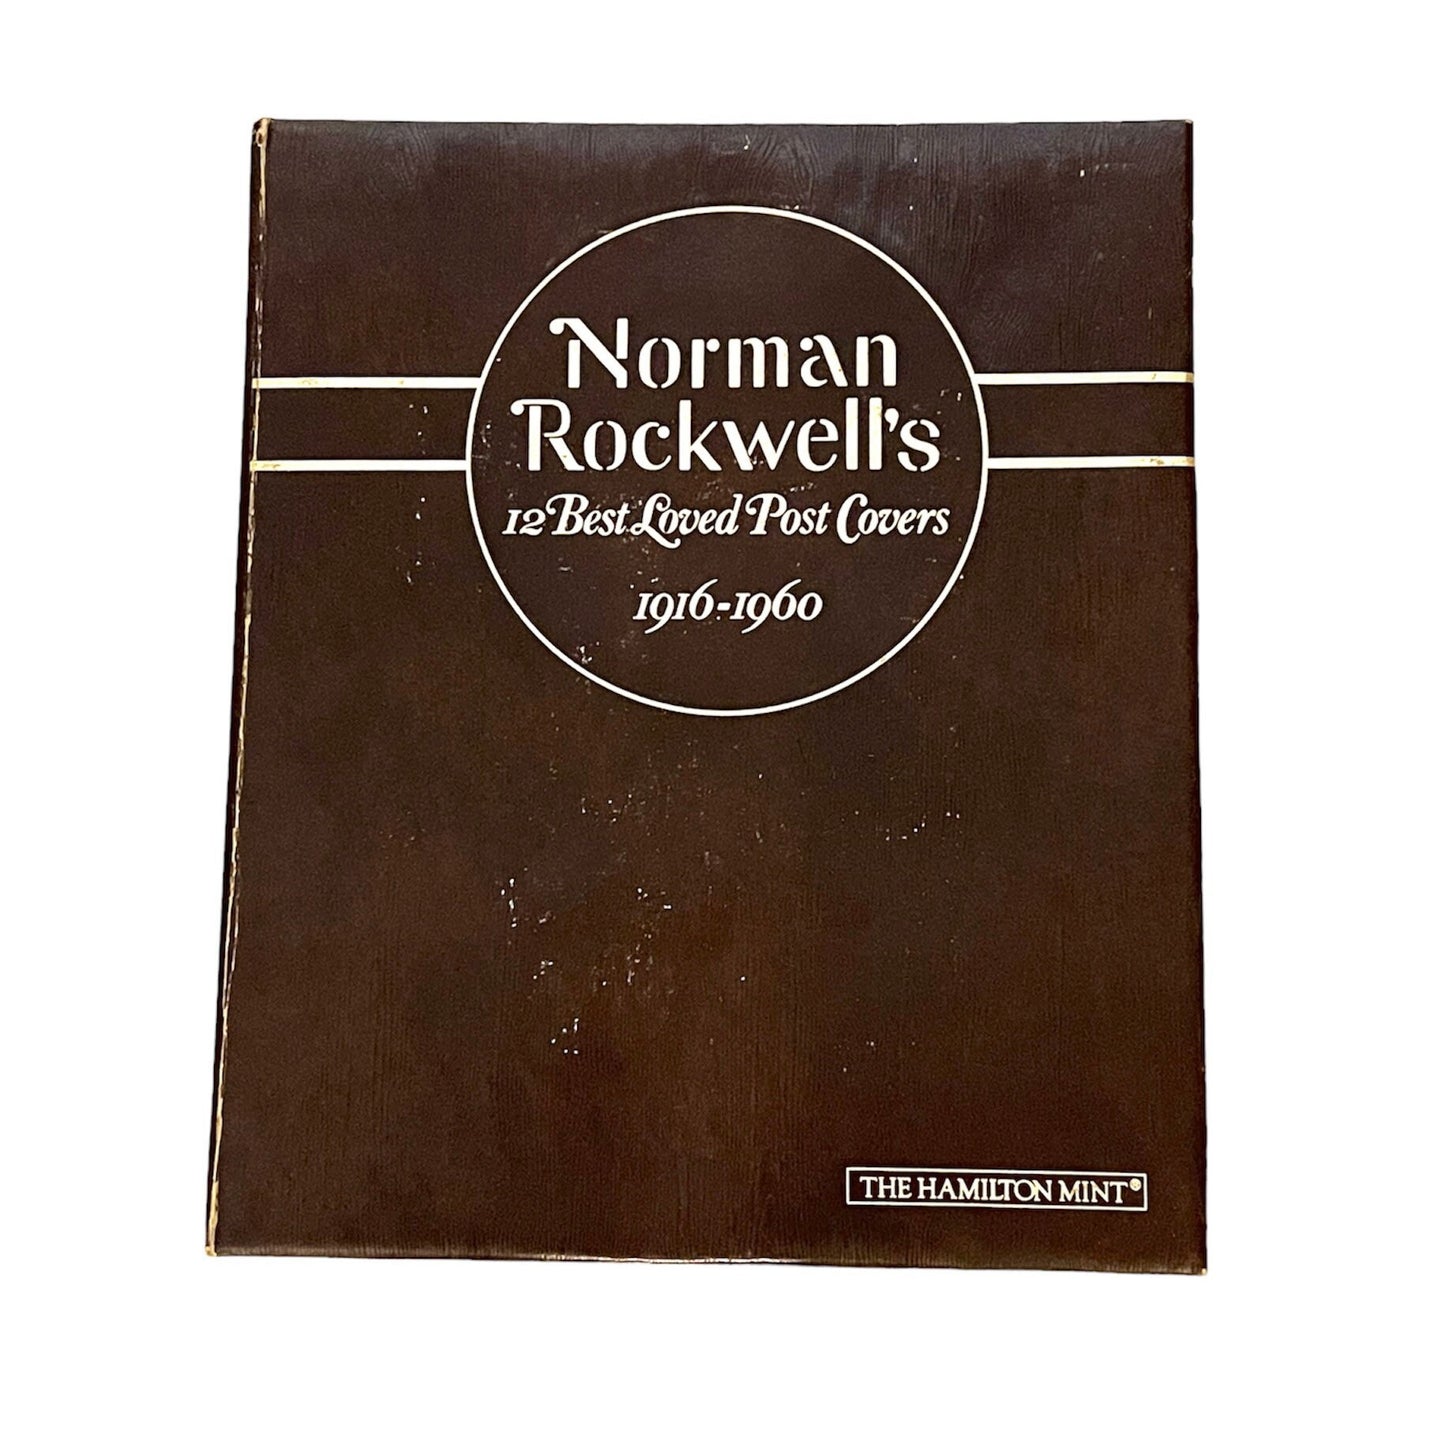 Vintage Fine Silver Ingot Collection Norman Rockwell | Norman Rockwell’s 12 Best Loved Post Covers | 1 OZ Fine Silver Ingot Collection of 12